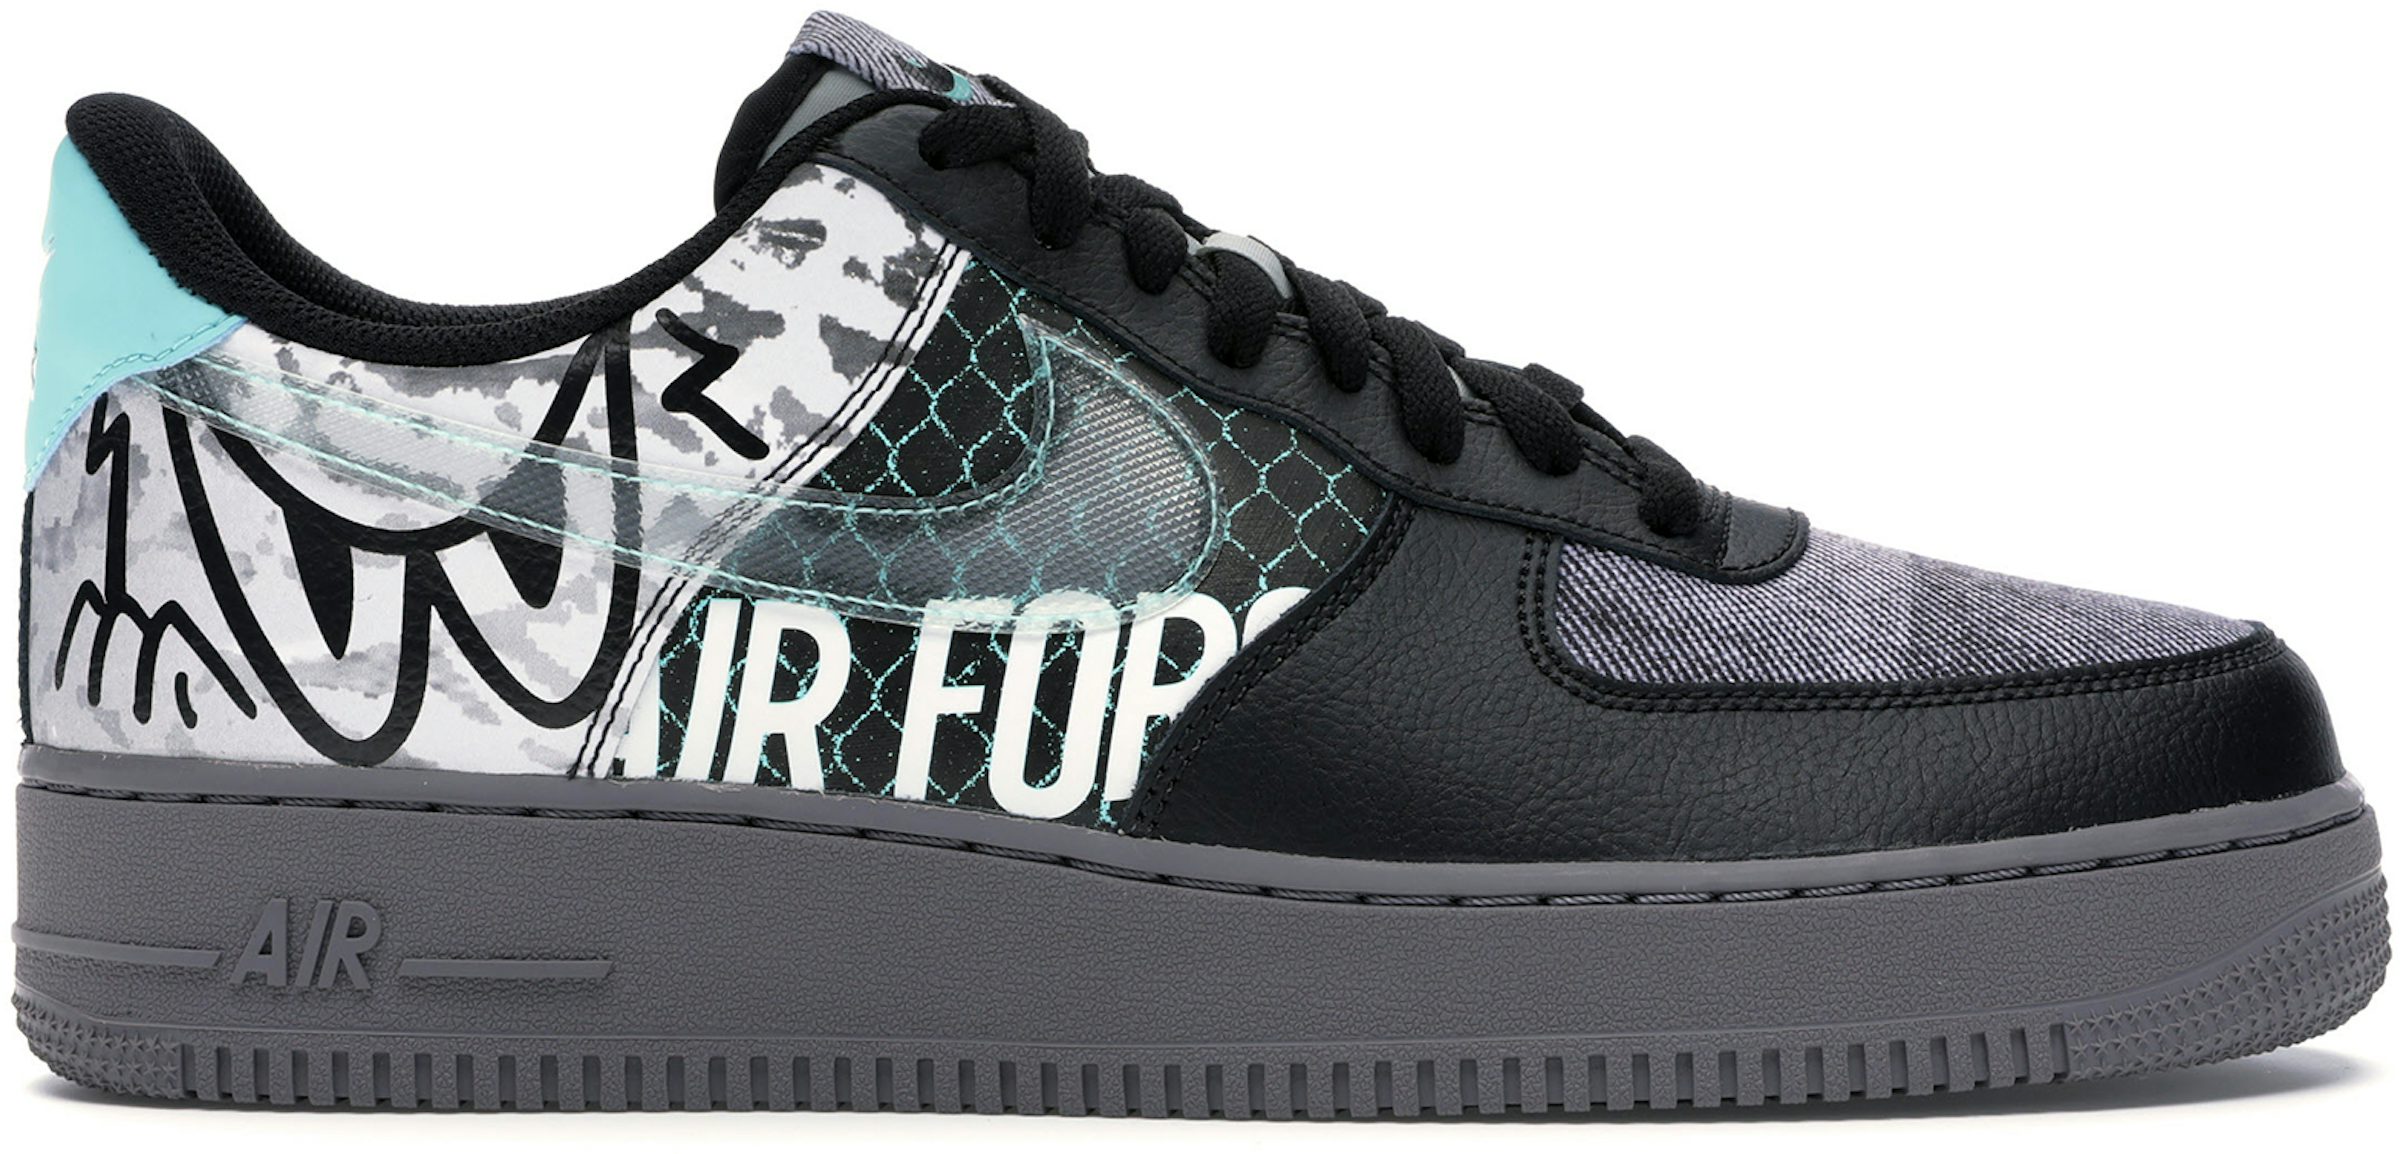 Louis Vuitton x Nike Air Force One, Exclusive Auction Release, Sneakers,  Sports Memorabilia & Modern Collectibles